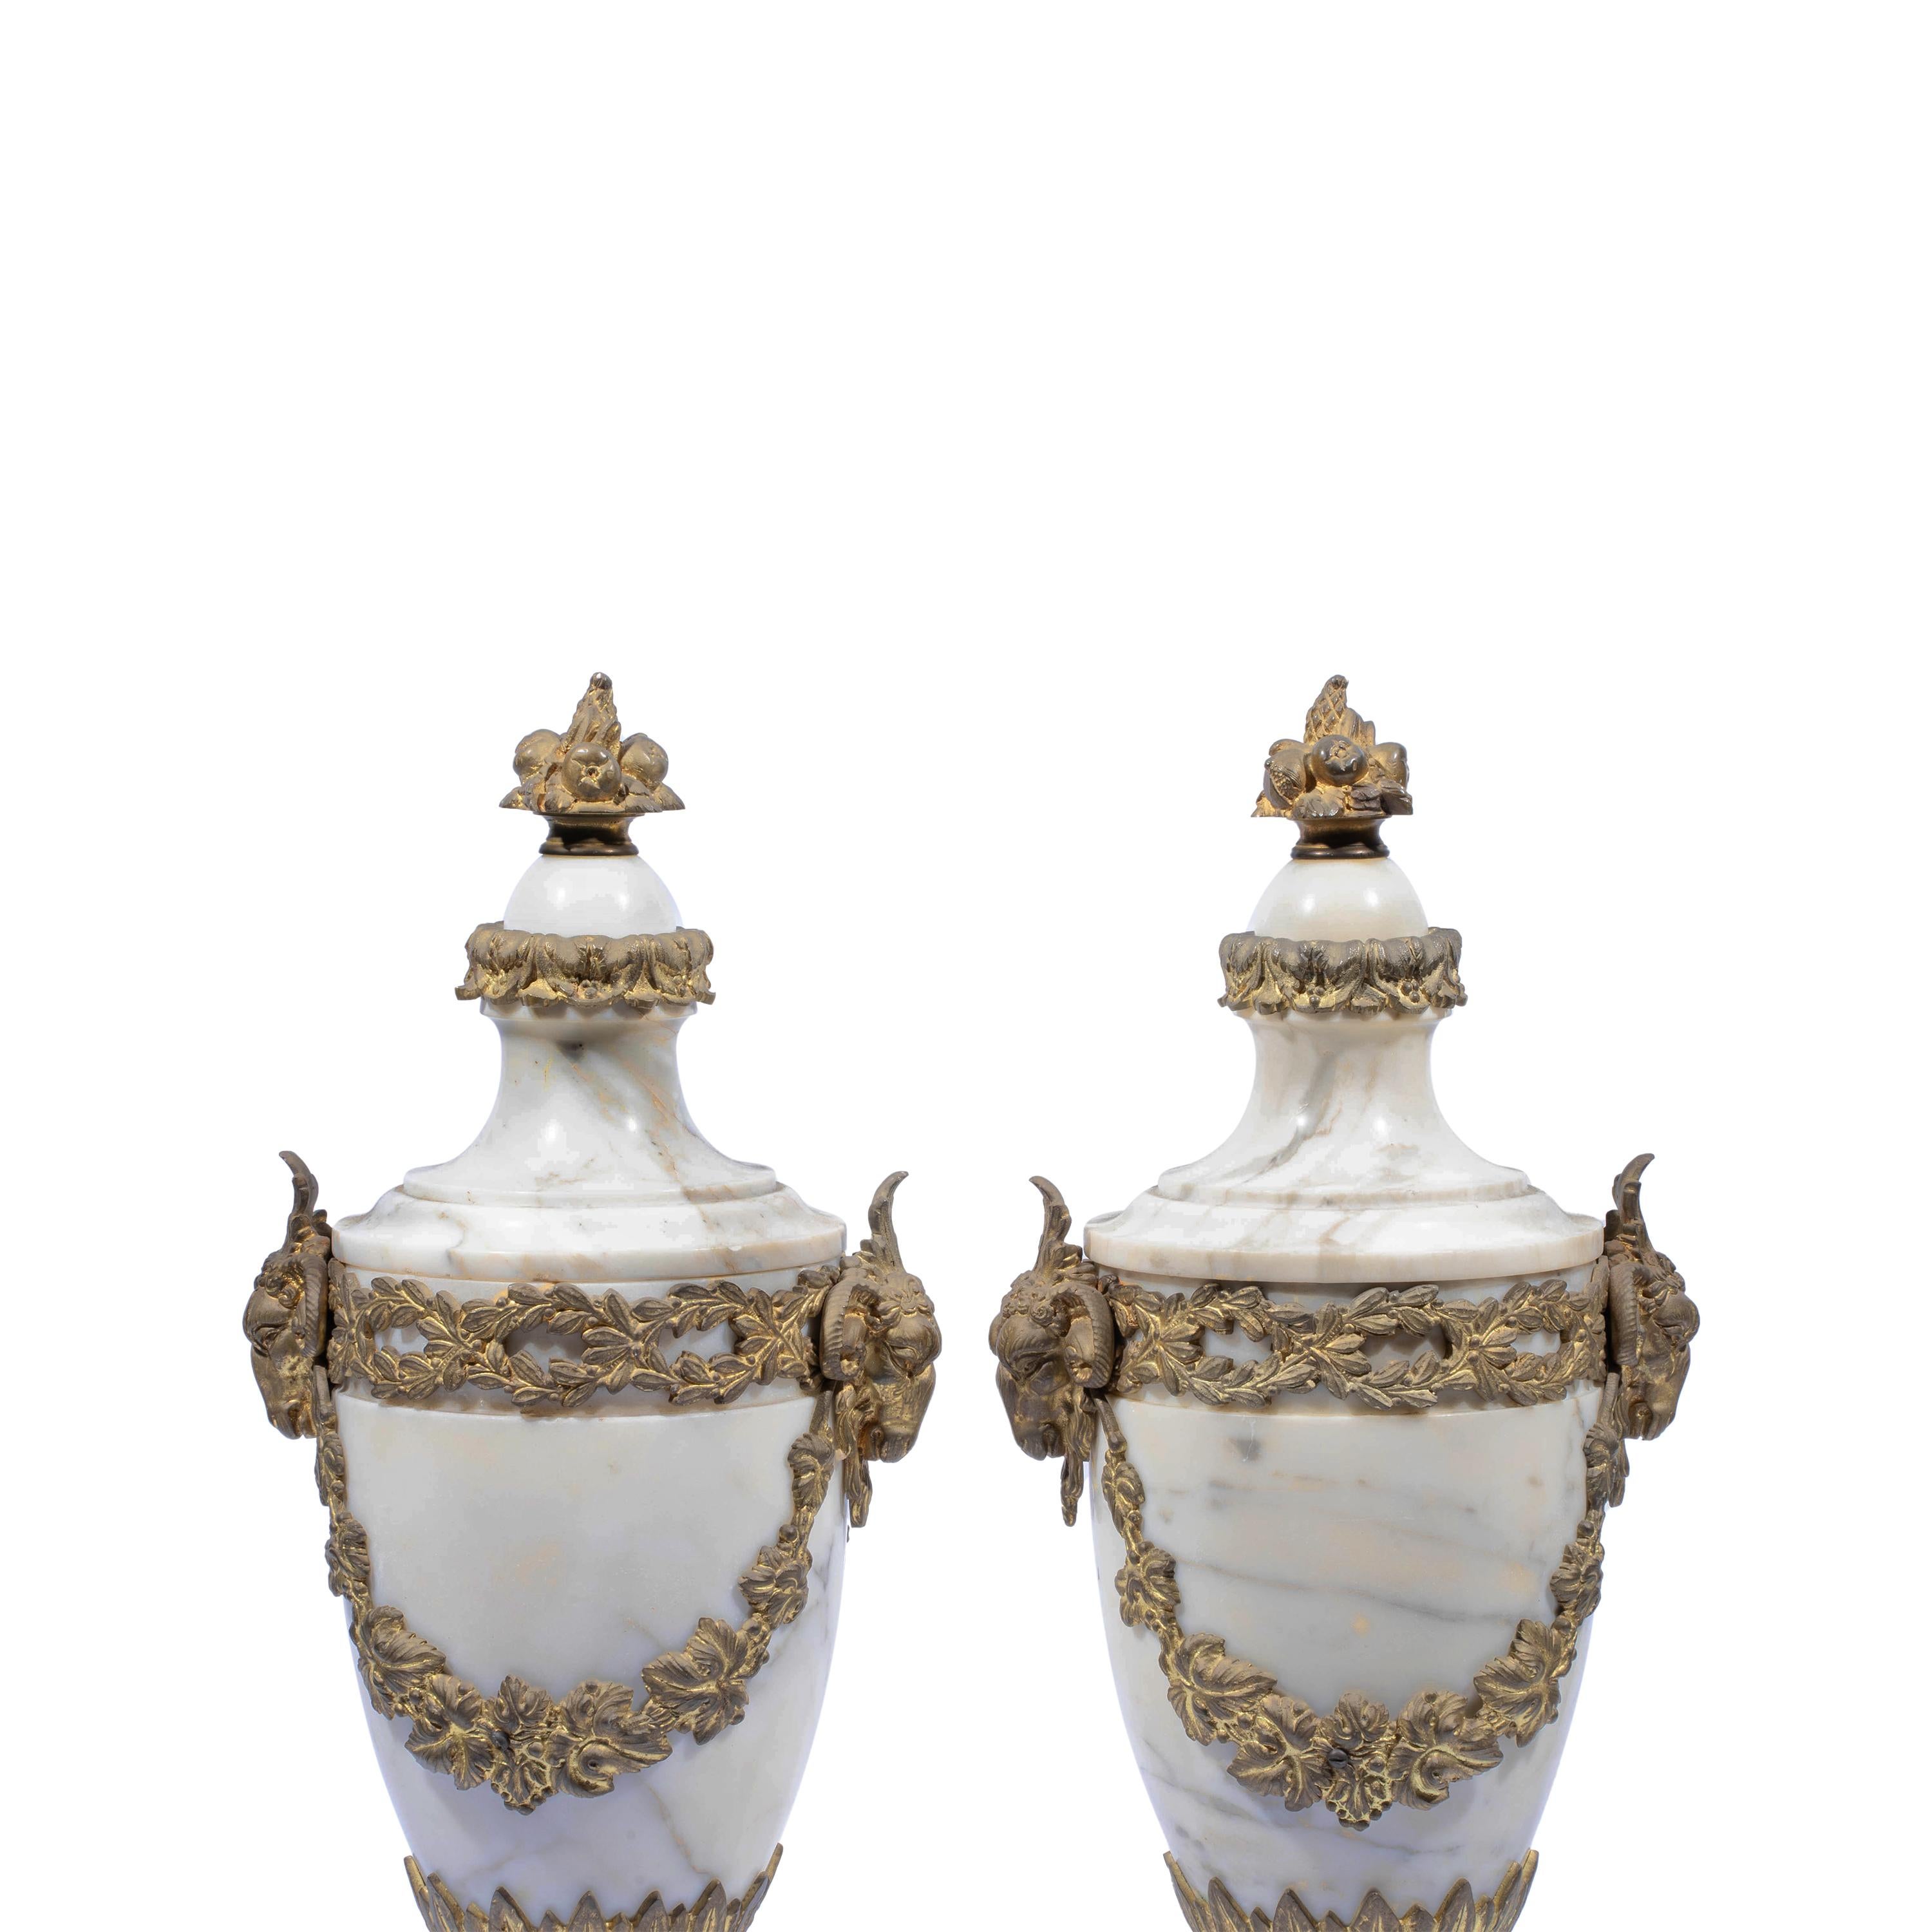 20th Century Pair of French Ormolu Mounted White Marble Vases, Circa 1900 For Sale